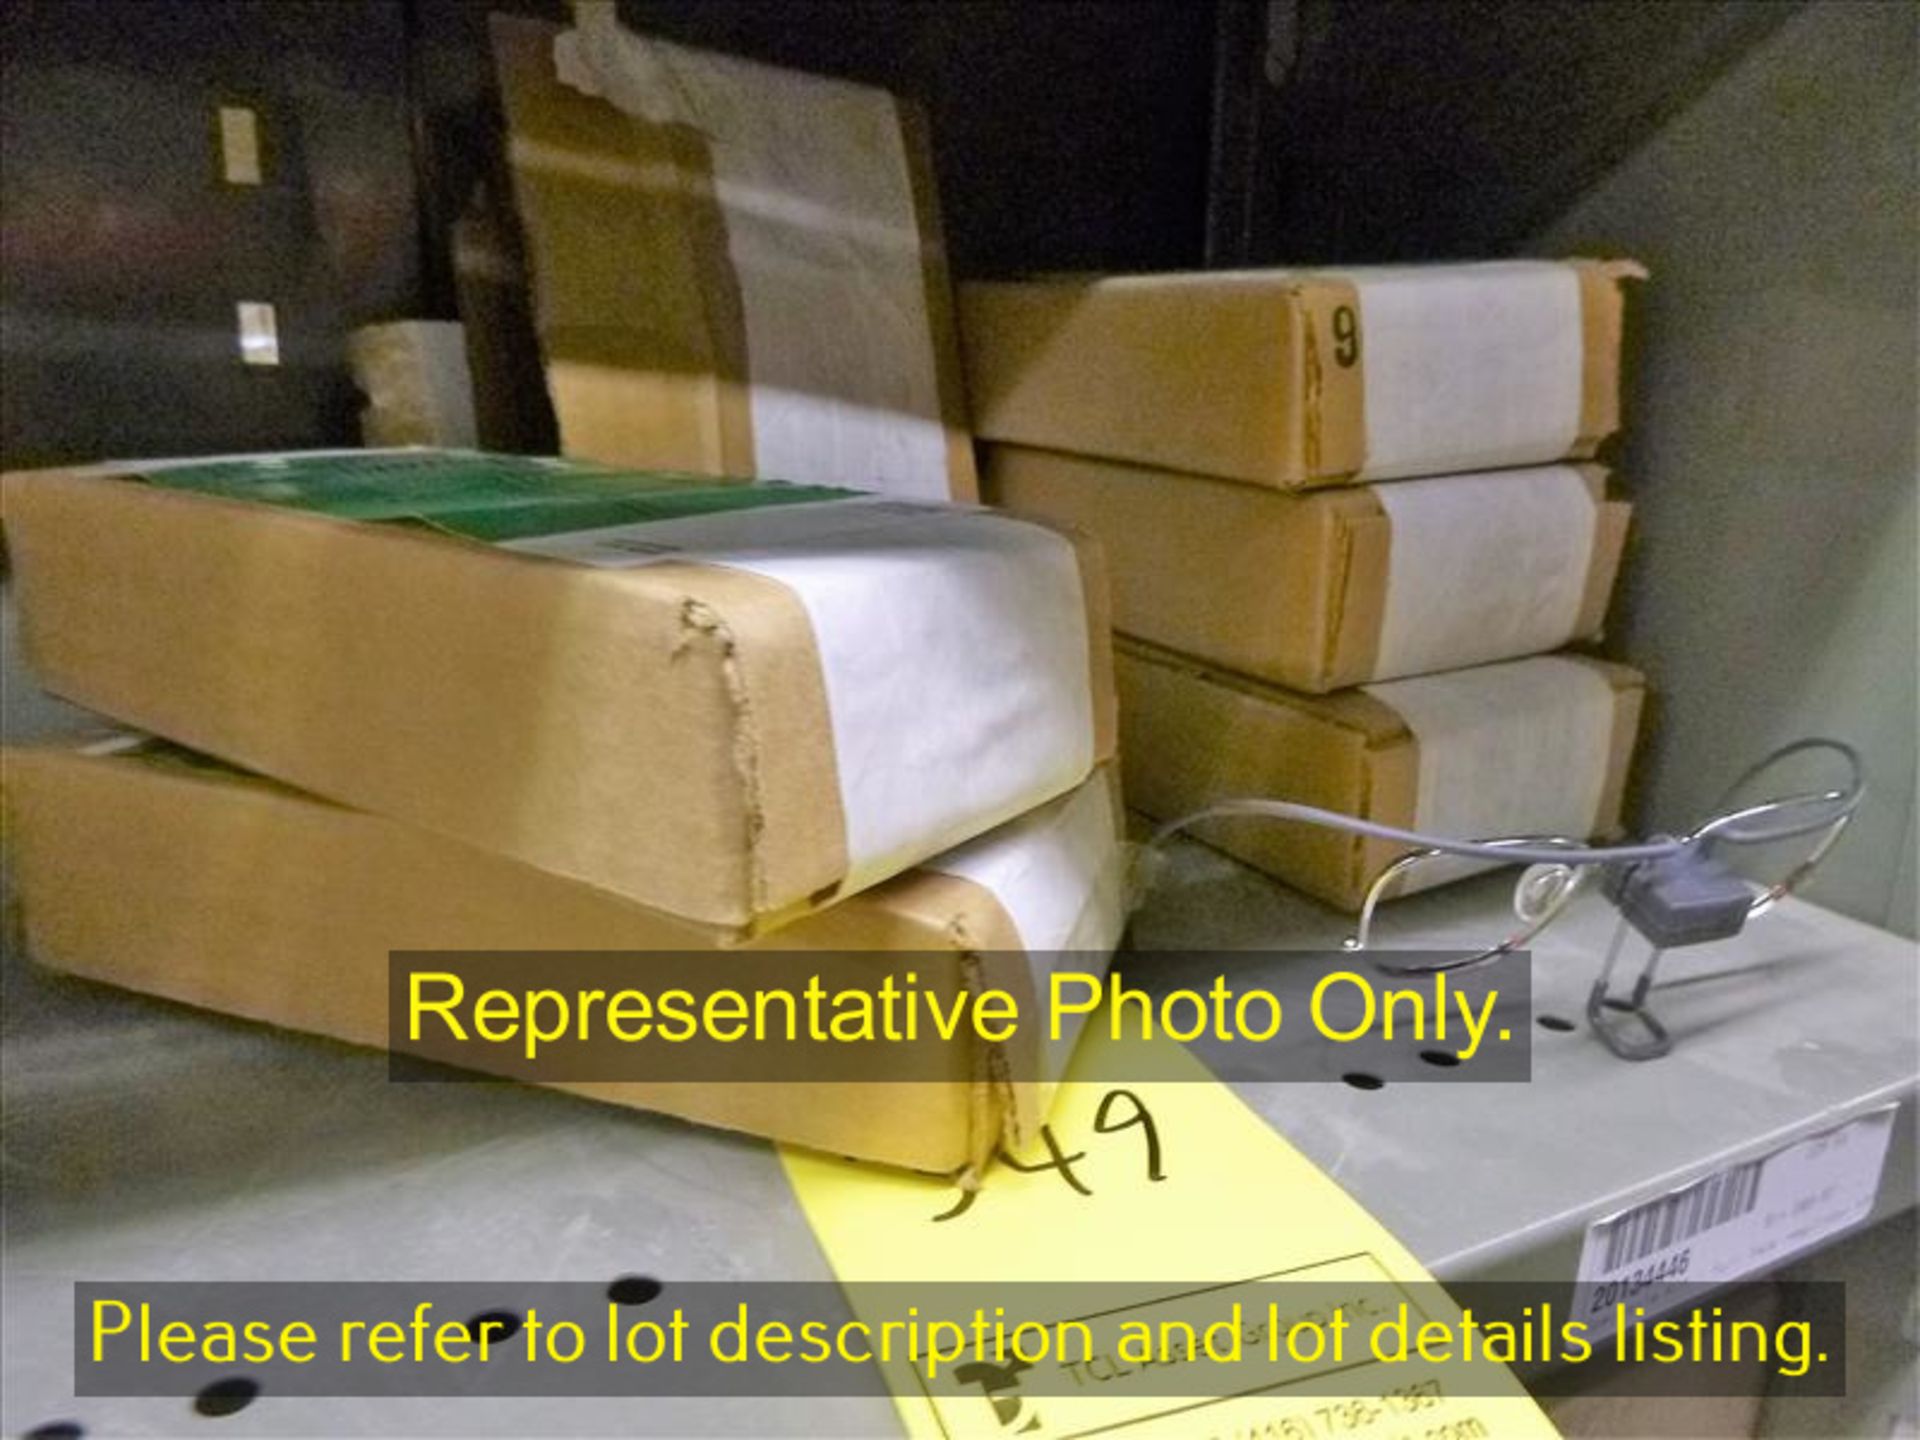 (4) spectacle insert kits, p/n 454819 [Items shown in original packaging may be delivered repackaged